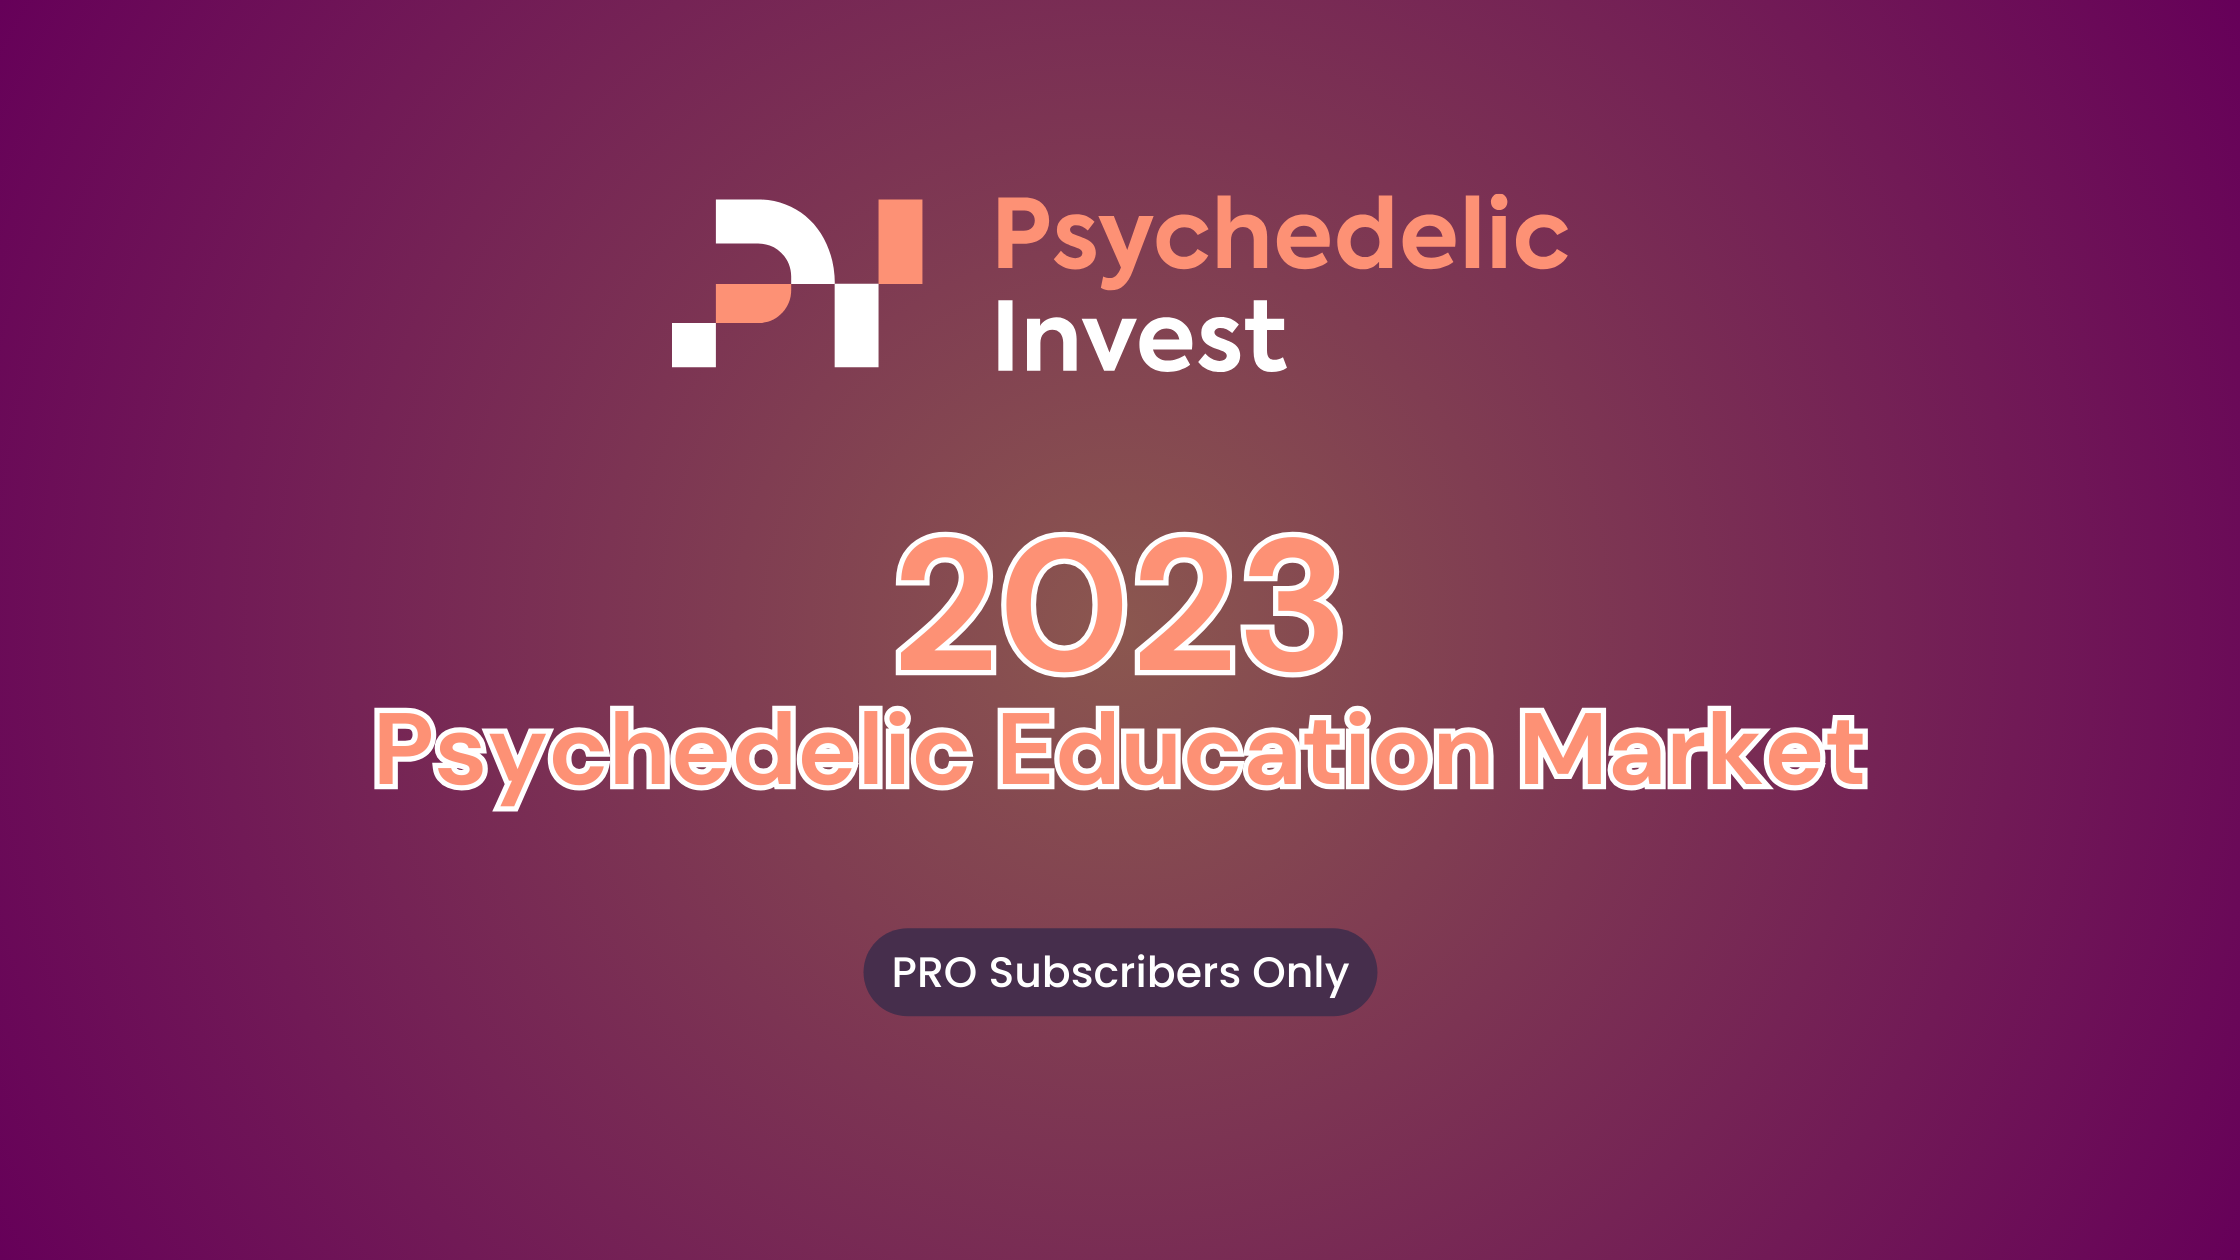 The Psychedelic Education Market in 2023 (PRO REPORT)